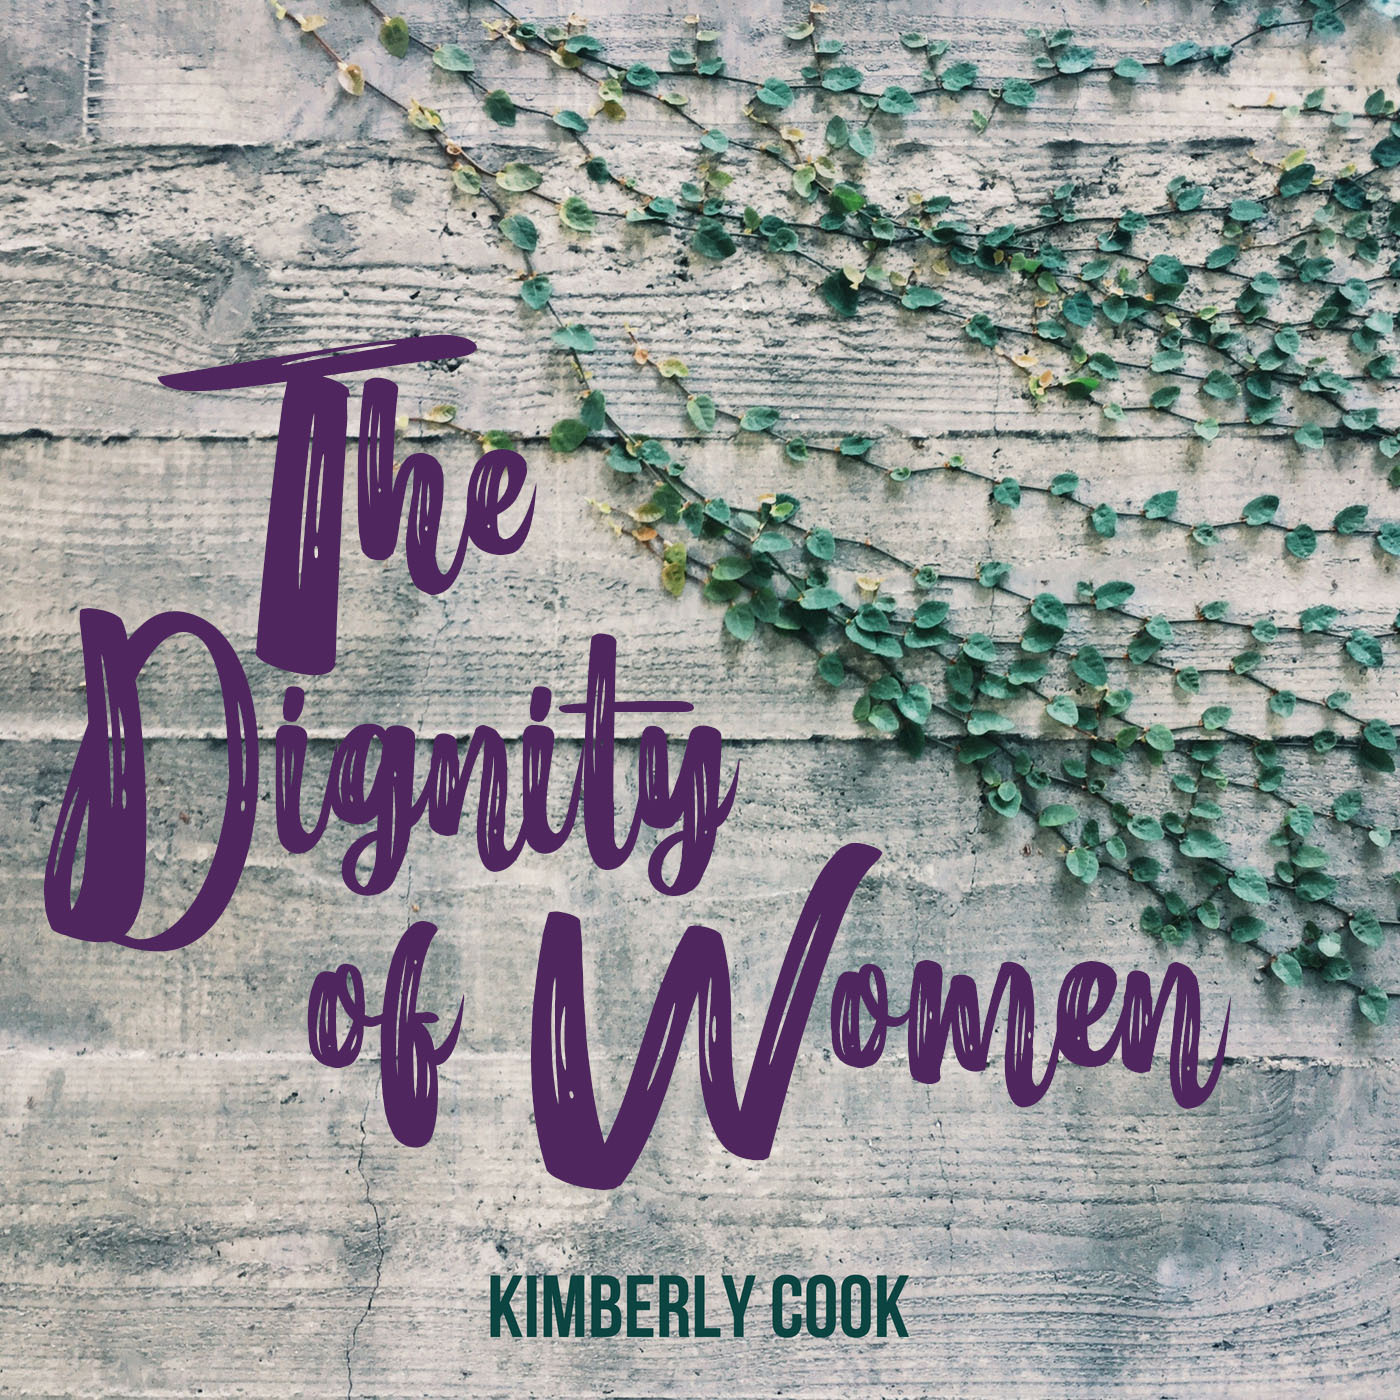 The Dignity of Women - Episode 001